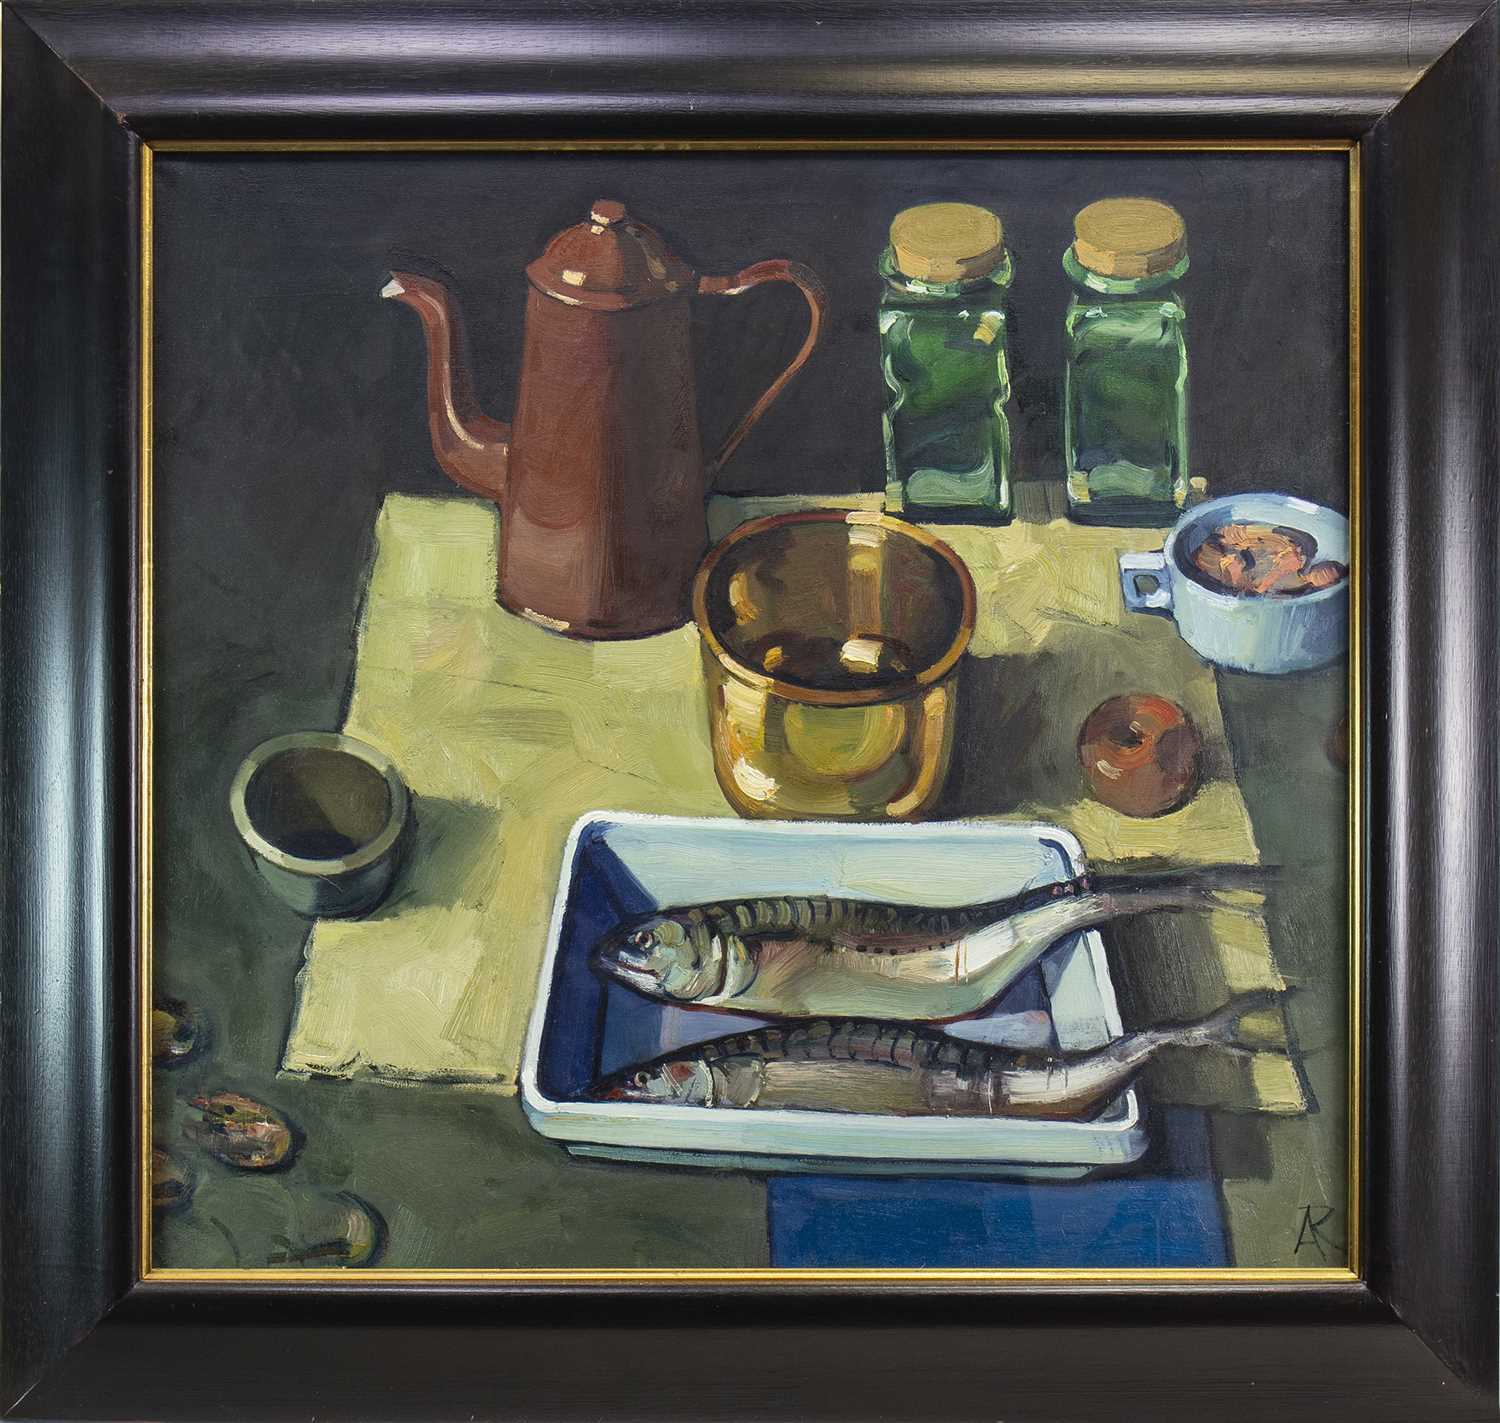 Lot 577 - TWO FISH AND A COPPER KETTLE, AN OIL BY ALEXANDER ROBB